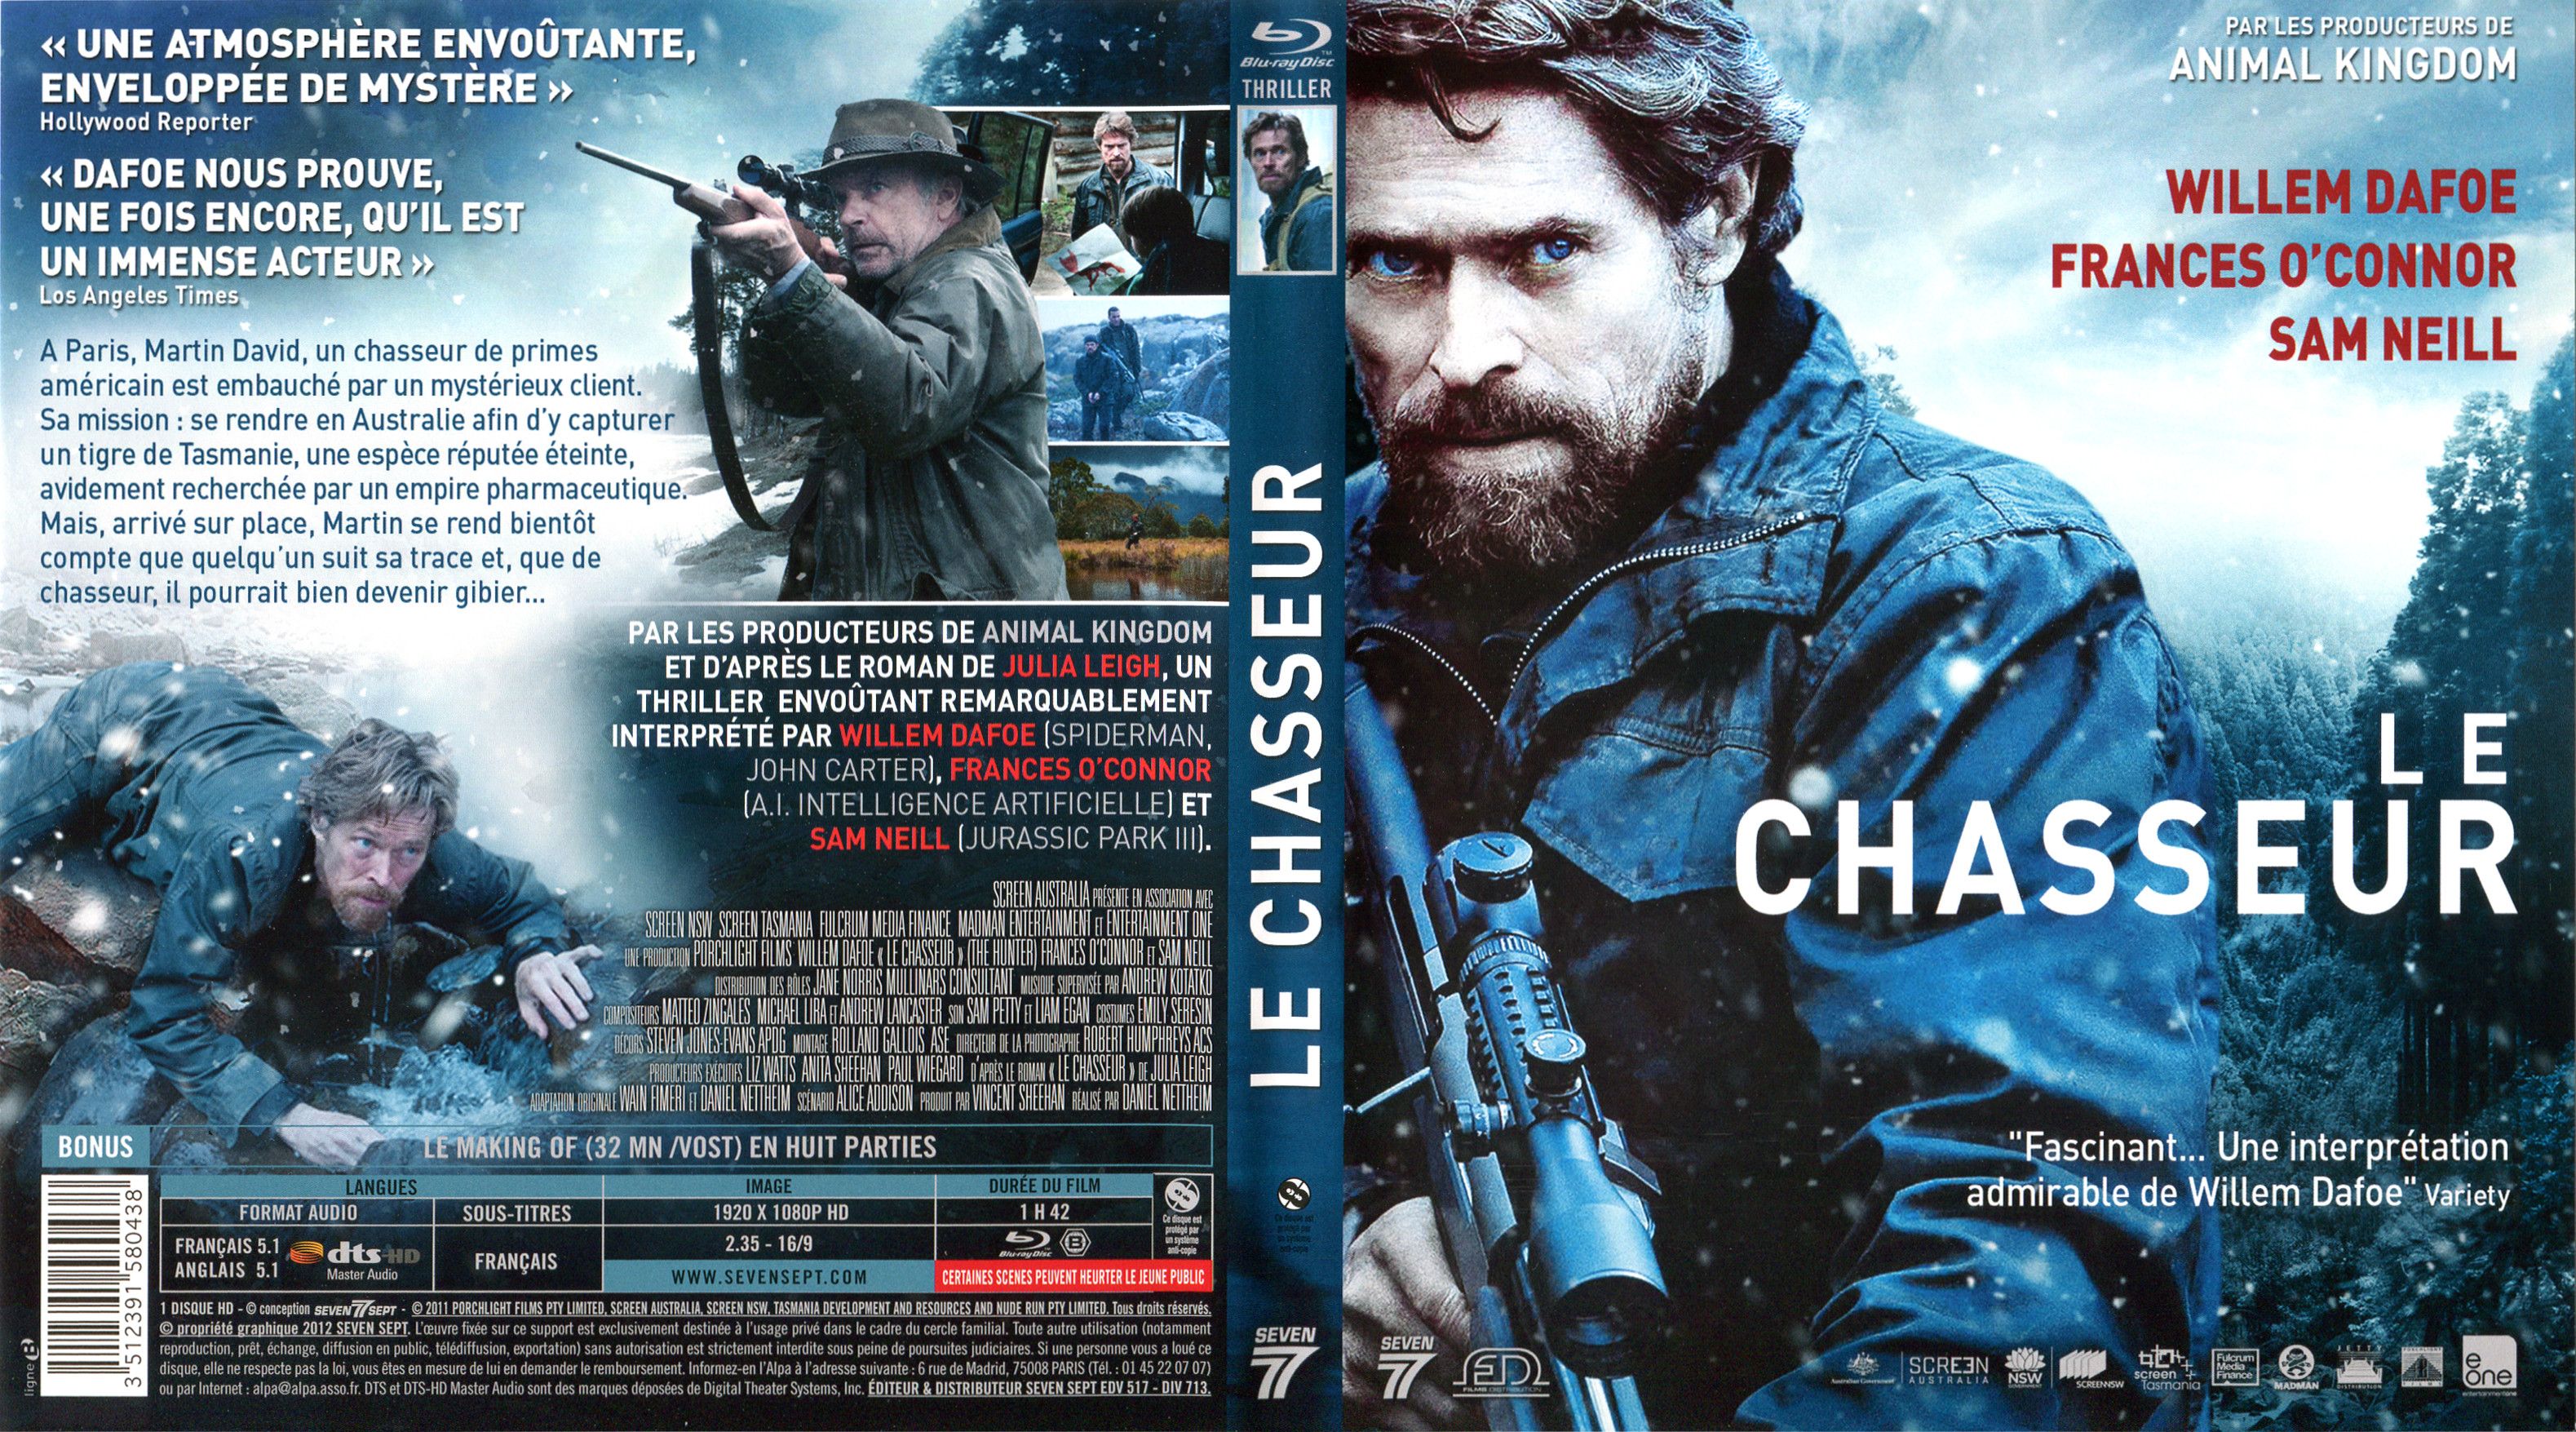 Jaquette DVD Le Chasseur (2012) (BLU-RAY)